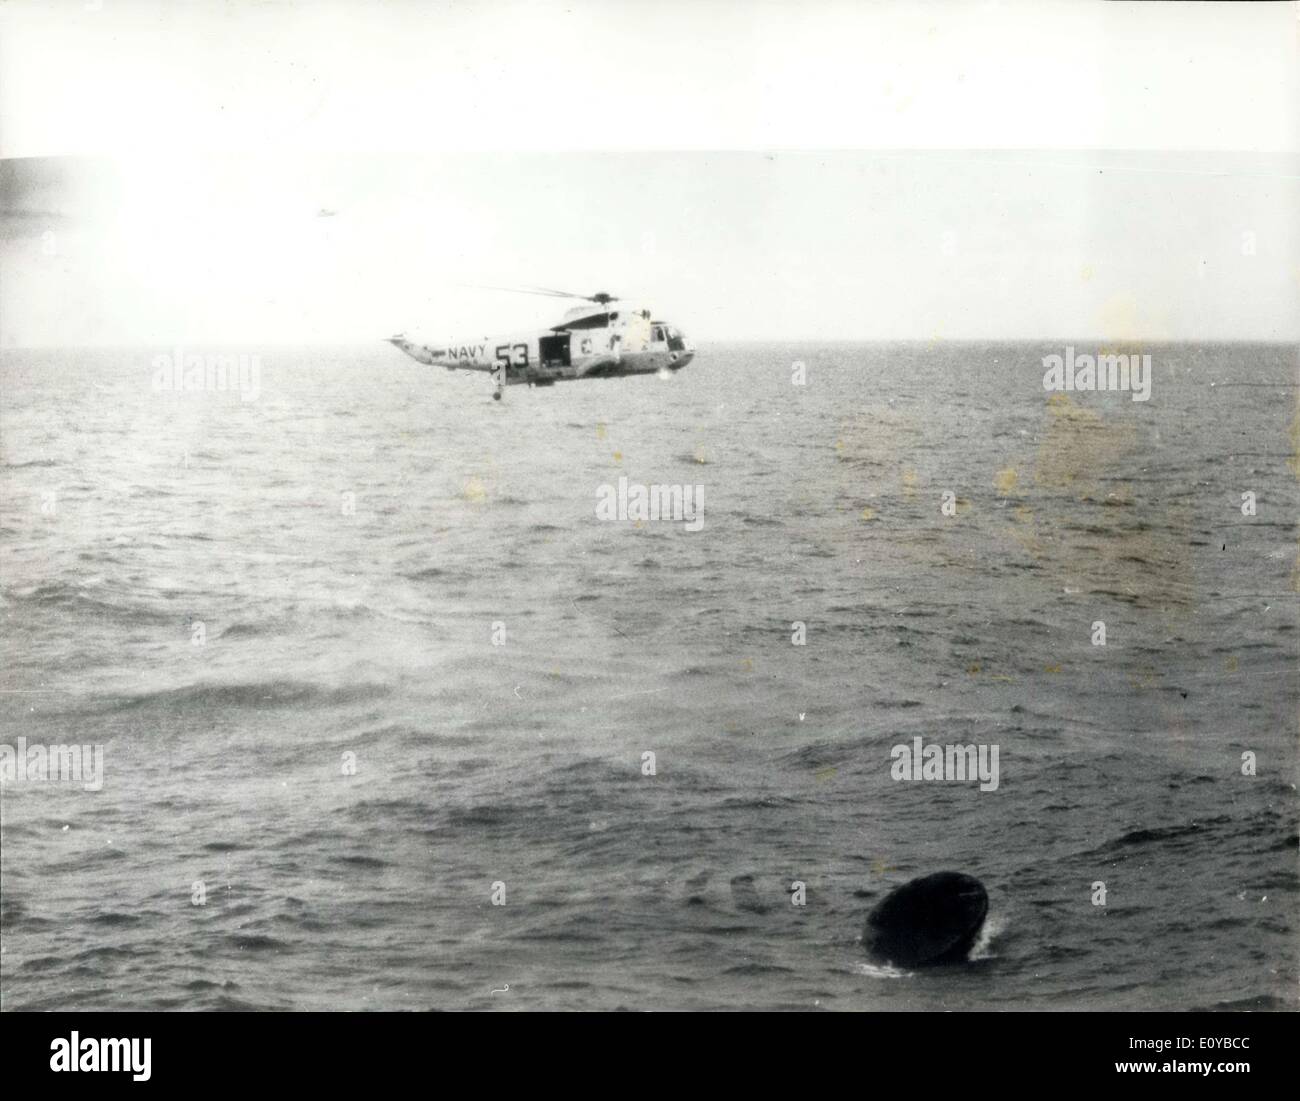 Jul. 29, 1969 - Apollo 11 Splashdown: A rescue helicopter never above the 11 spacecraft seconds after it splashed down in the pacific ocean at 12.5 P.M. EDT July 24, 1969. The spacecraft turned apex down after impact, as shown here, but inflatable begs repositioned the spacecraft shortly after this view was taken. Splashdown and recovery took place 900 miles southwest of Hawaii, eight days after astronauts Neil Armstrong, Michael Collins and Edwin Aldrin, performed man's first lunar exploitation mission. Stock Photo